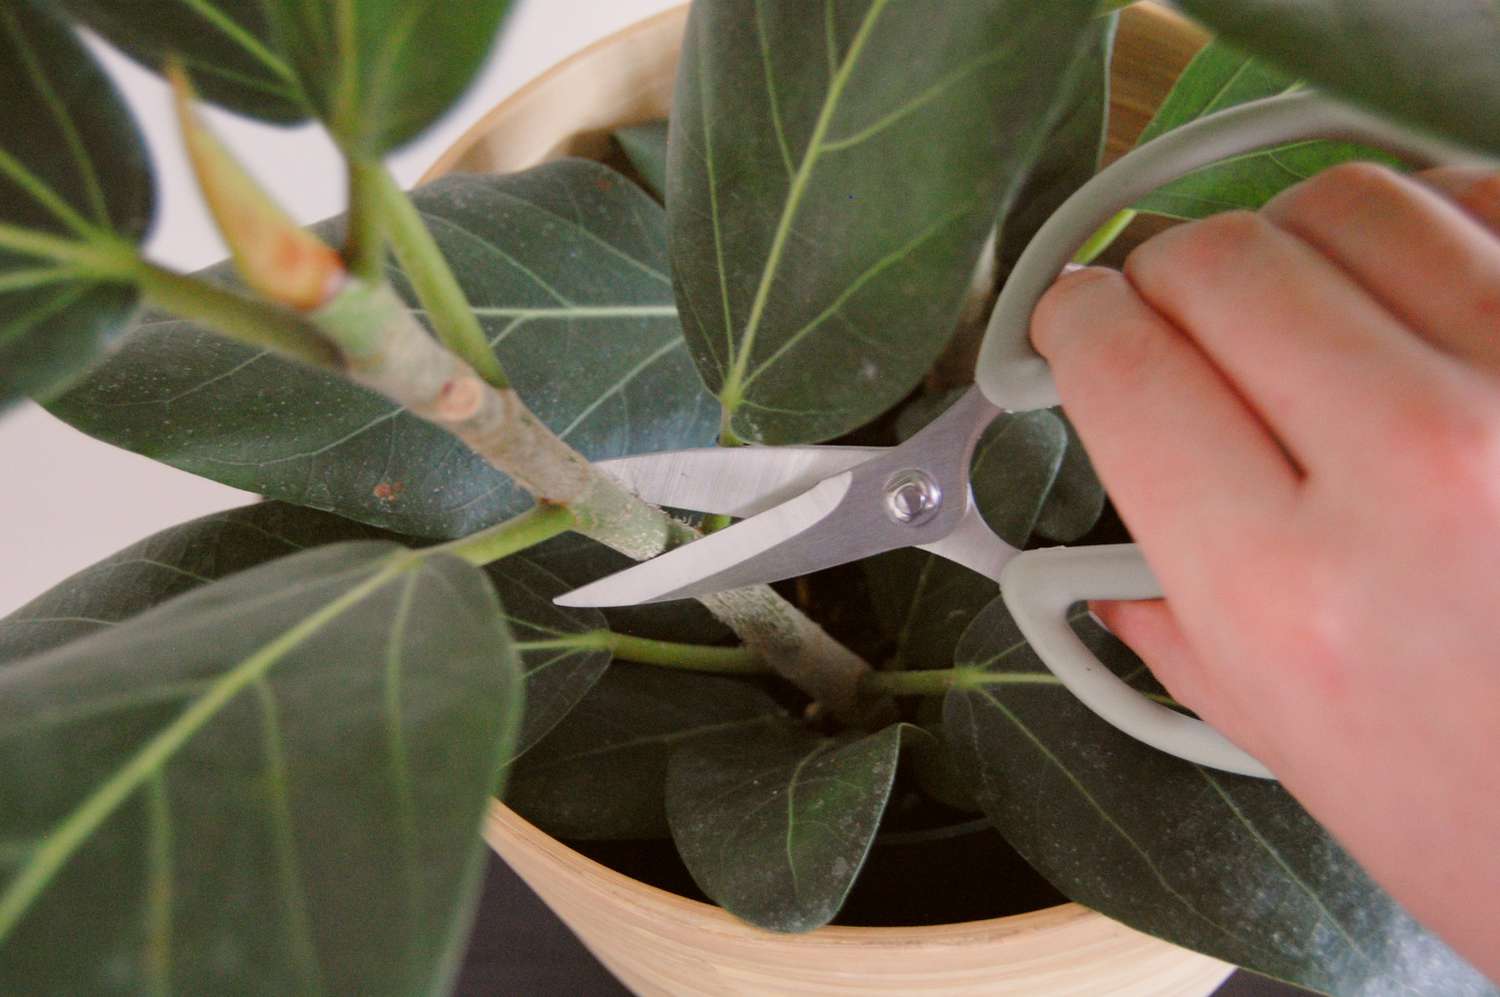 Taking a stem cutting of a ficus audrey tree with small scissor-like pruners.